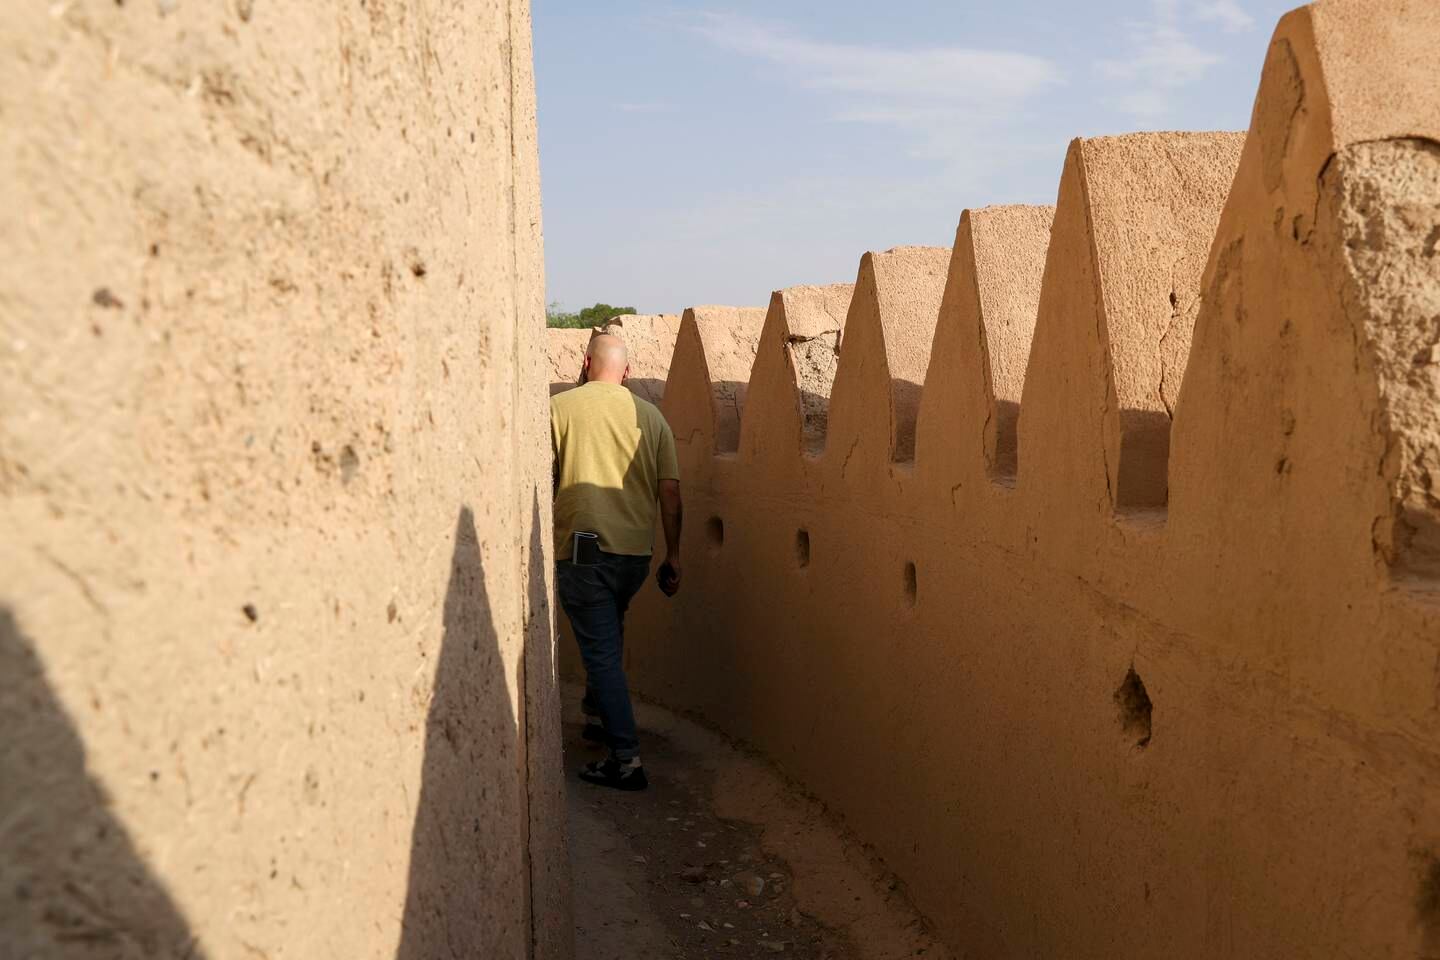 Al Jahili Fort is one of the UAE's most historic buildings, with walls made of mud, straw and fibres from palm trees. Khushnum Bhandari / The National 